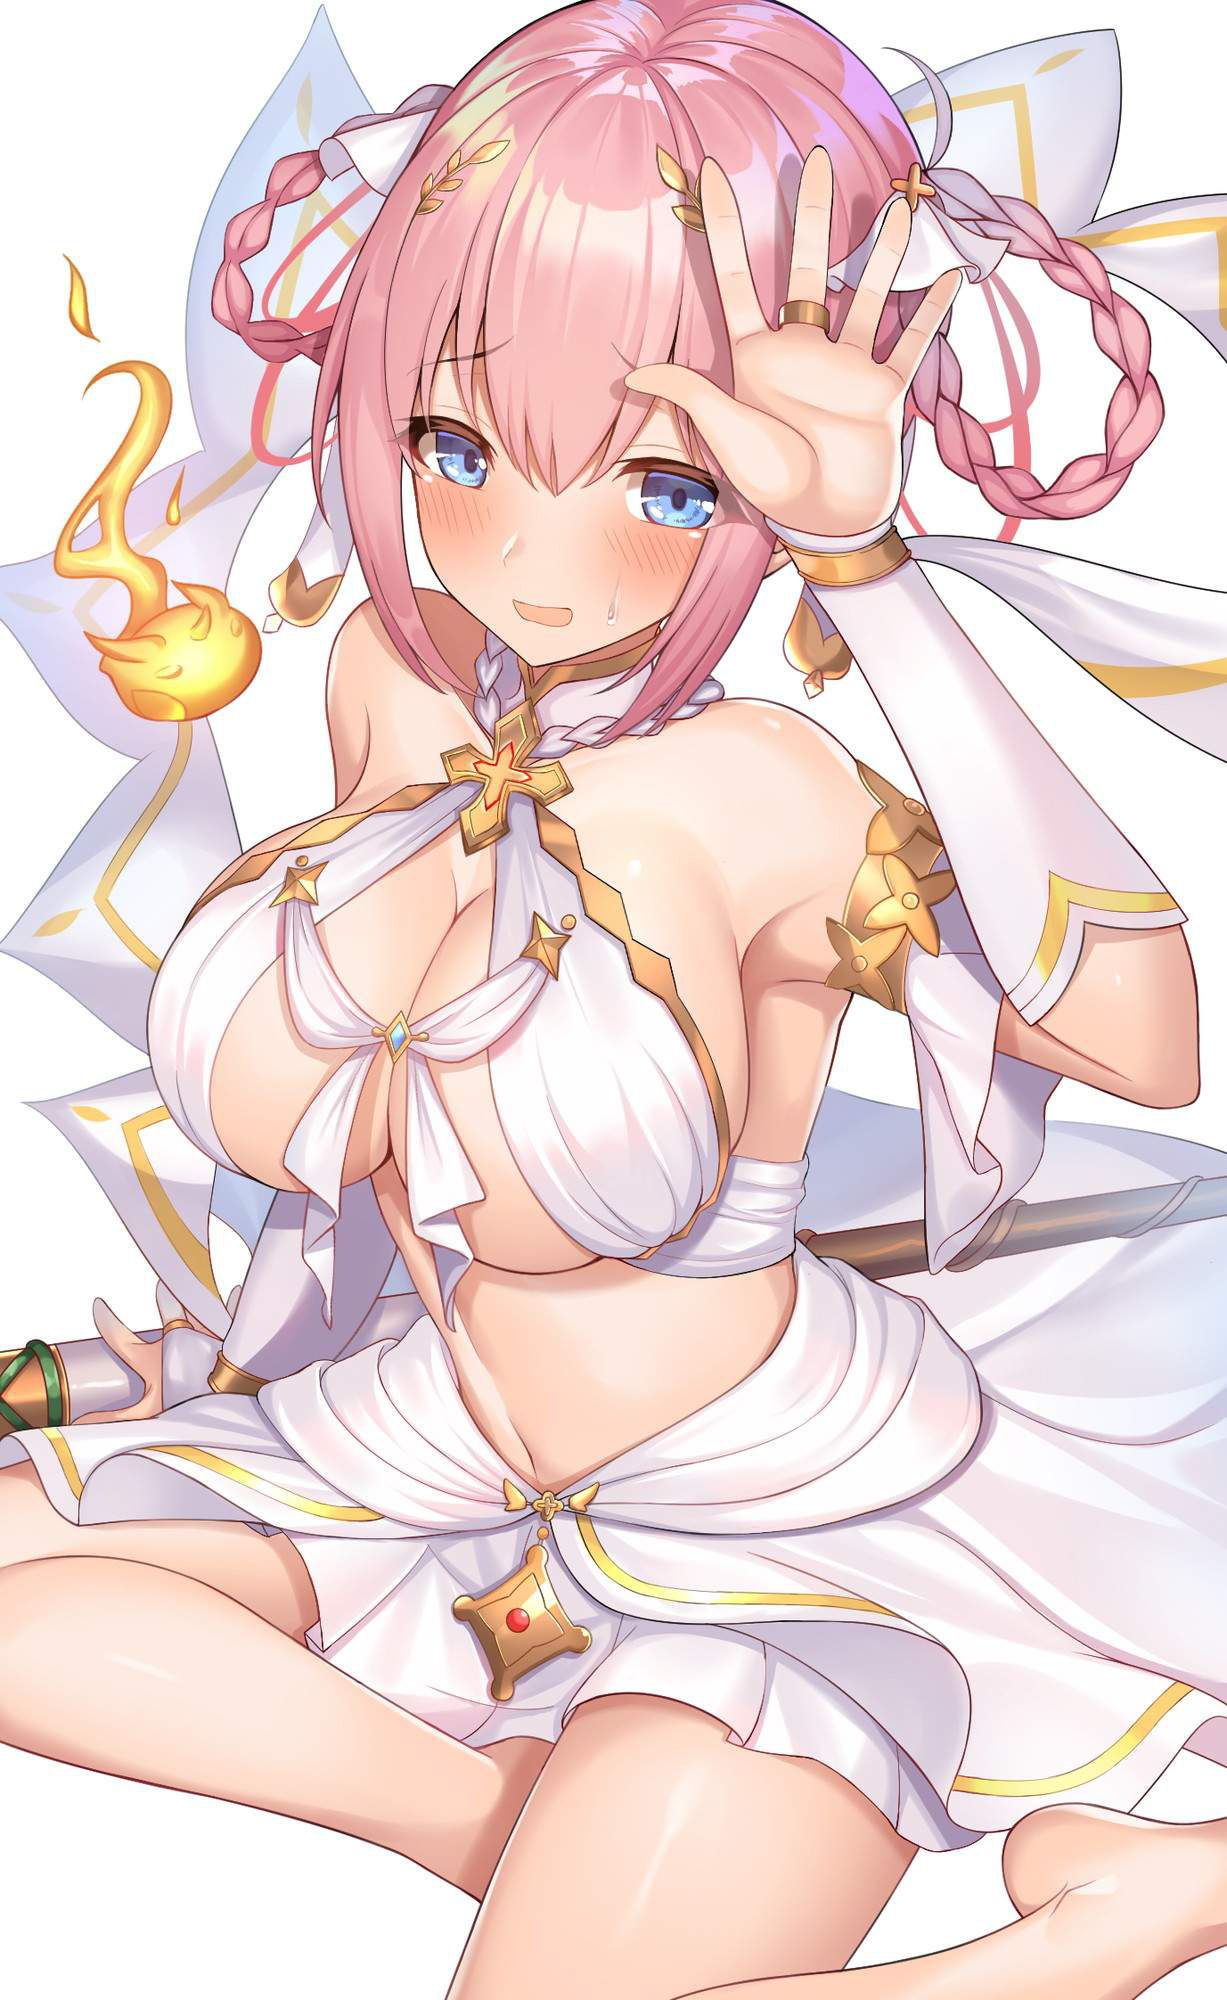 [Princess Connect! ] Erotic image that Yuy who wants to appreciate according to the erotic voice of the voice actor 1